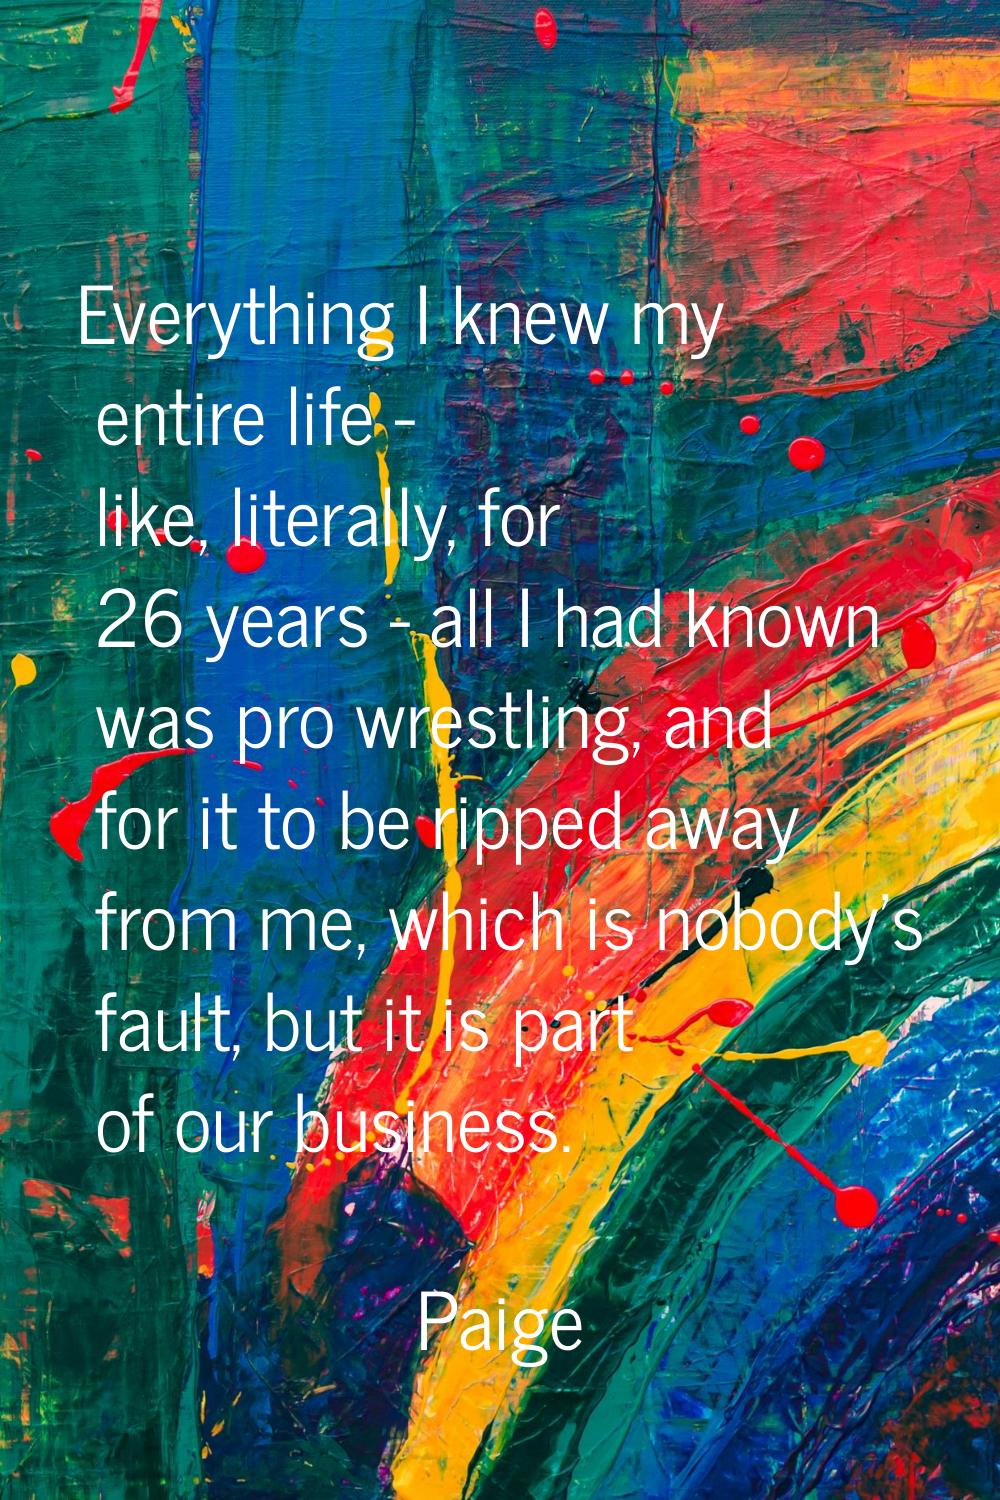 Everything I knew my entire life - like, literally, for 26 years - all I had known was pro wrestlin